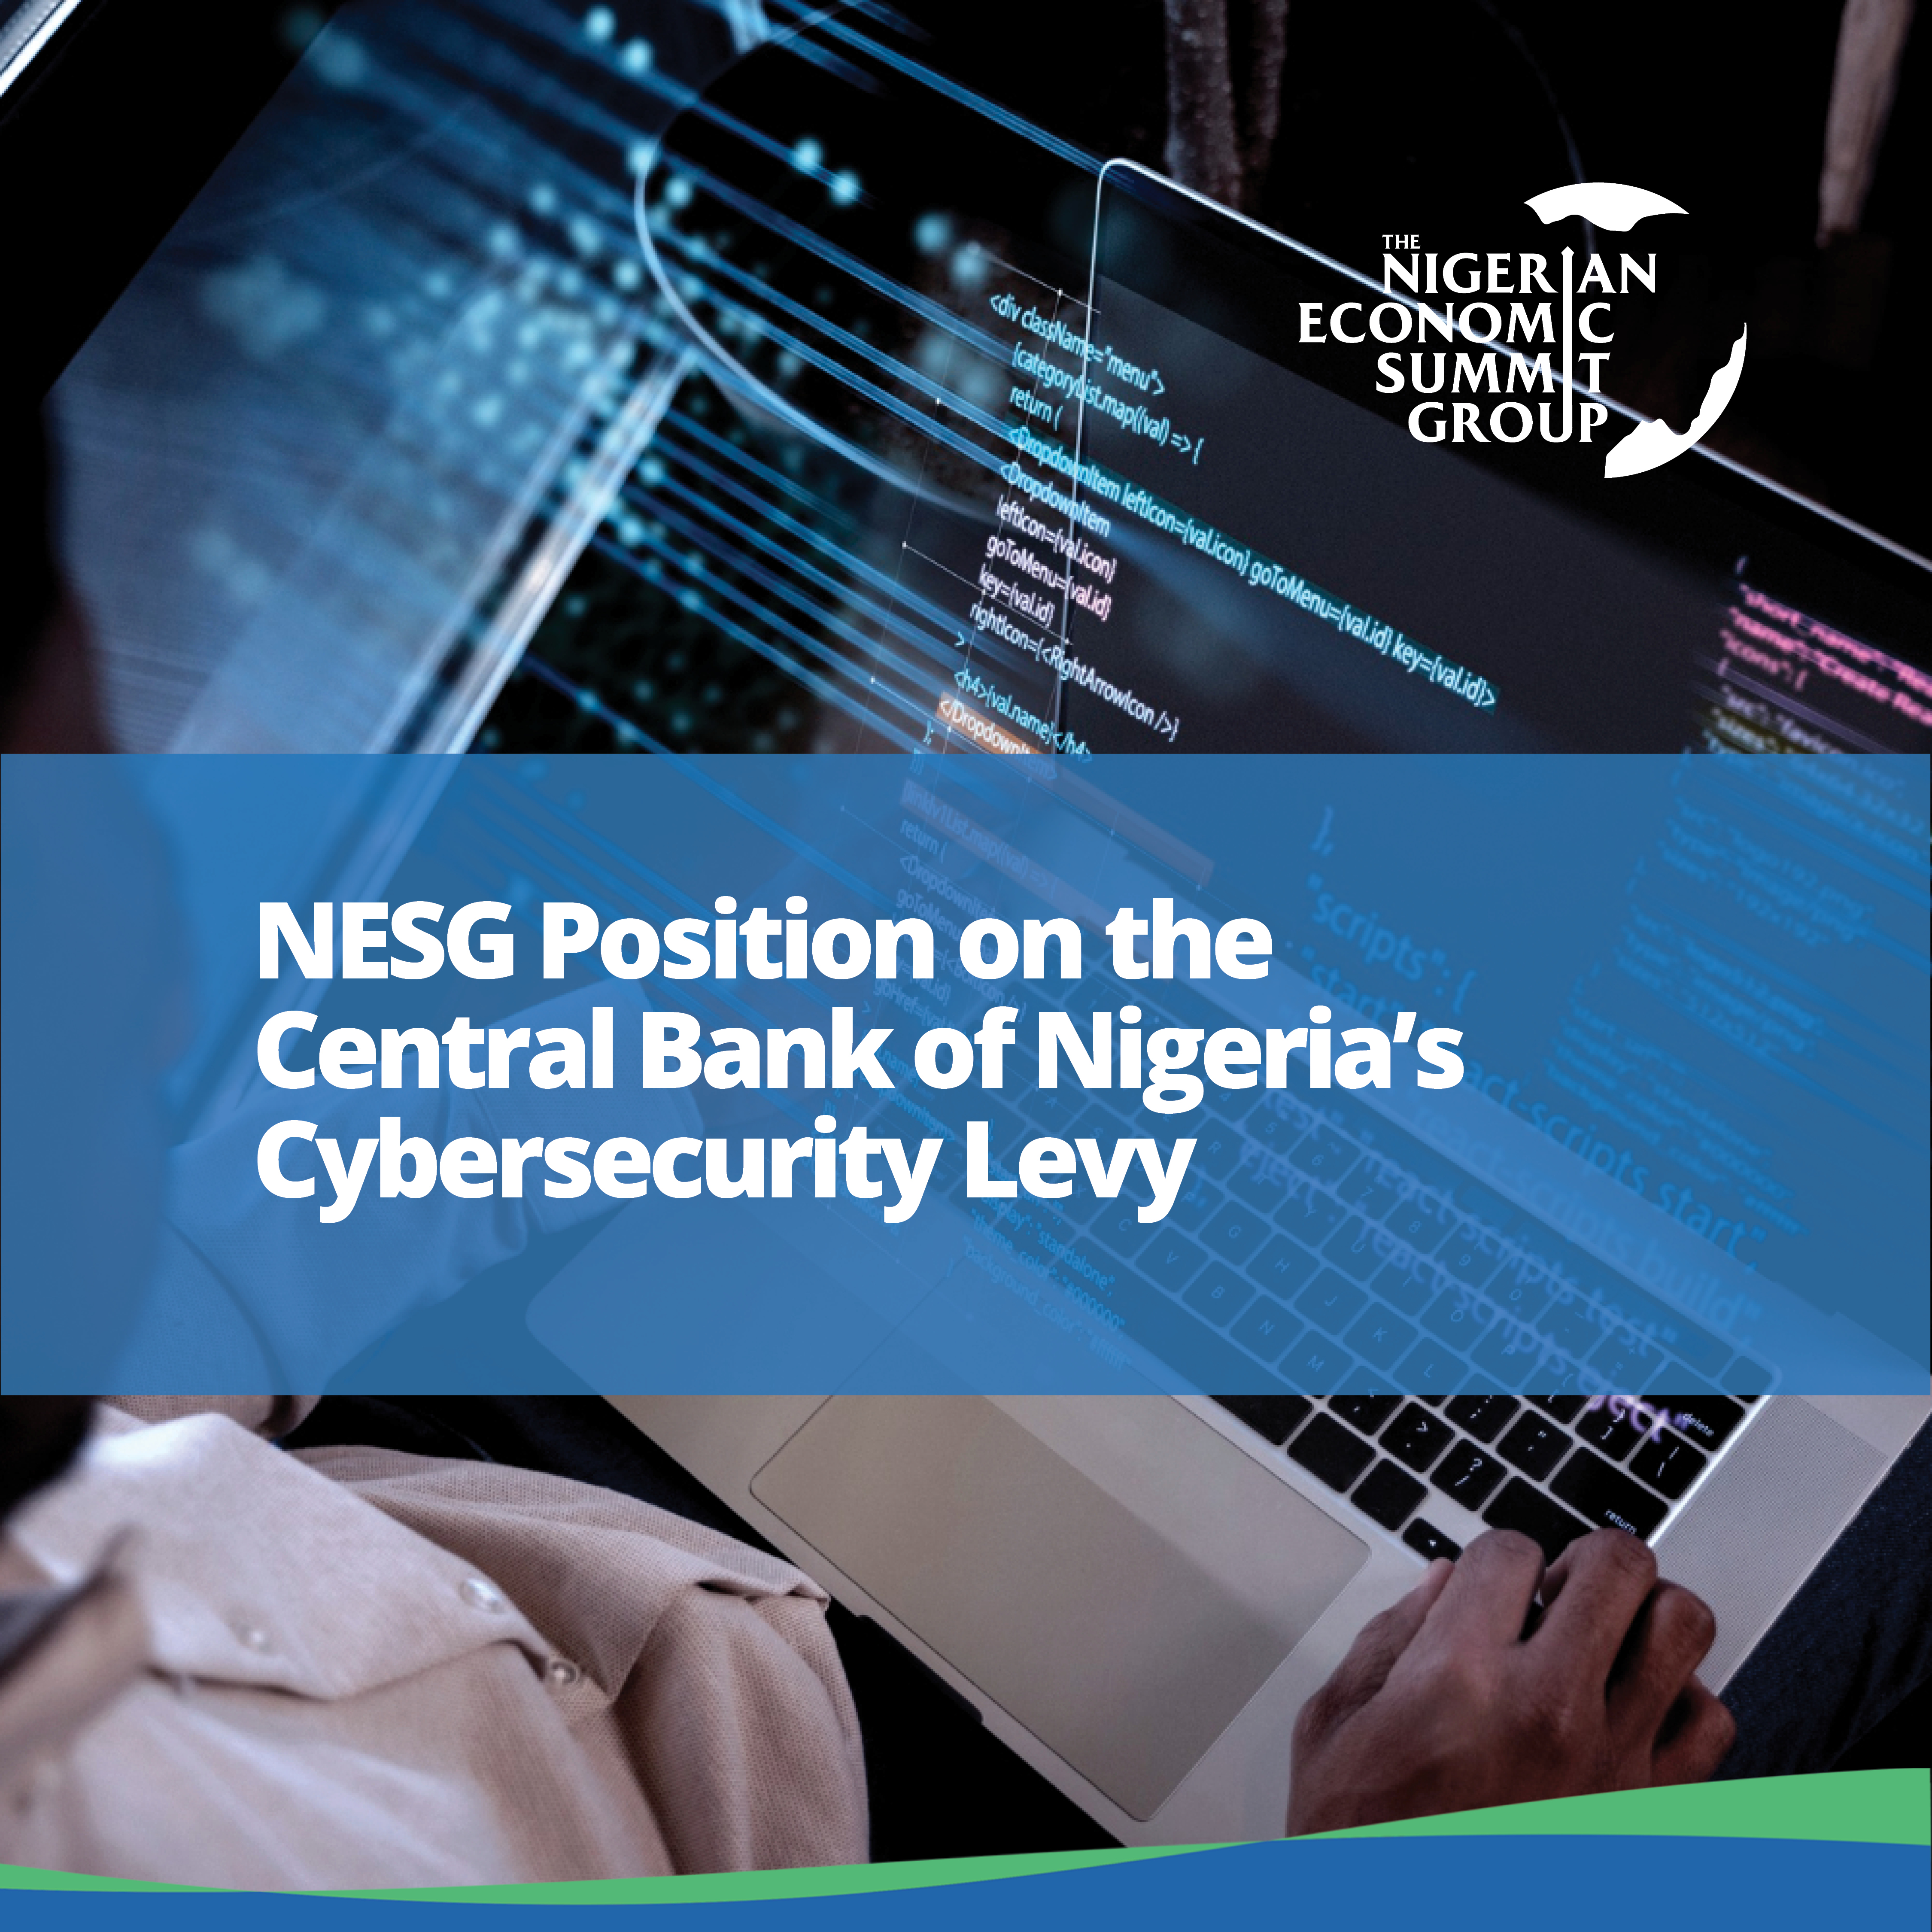 NESG Position on the Central Bank of Nigeria’s Cybersecurity Levy